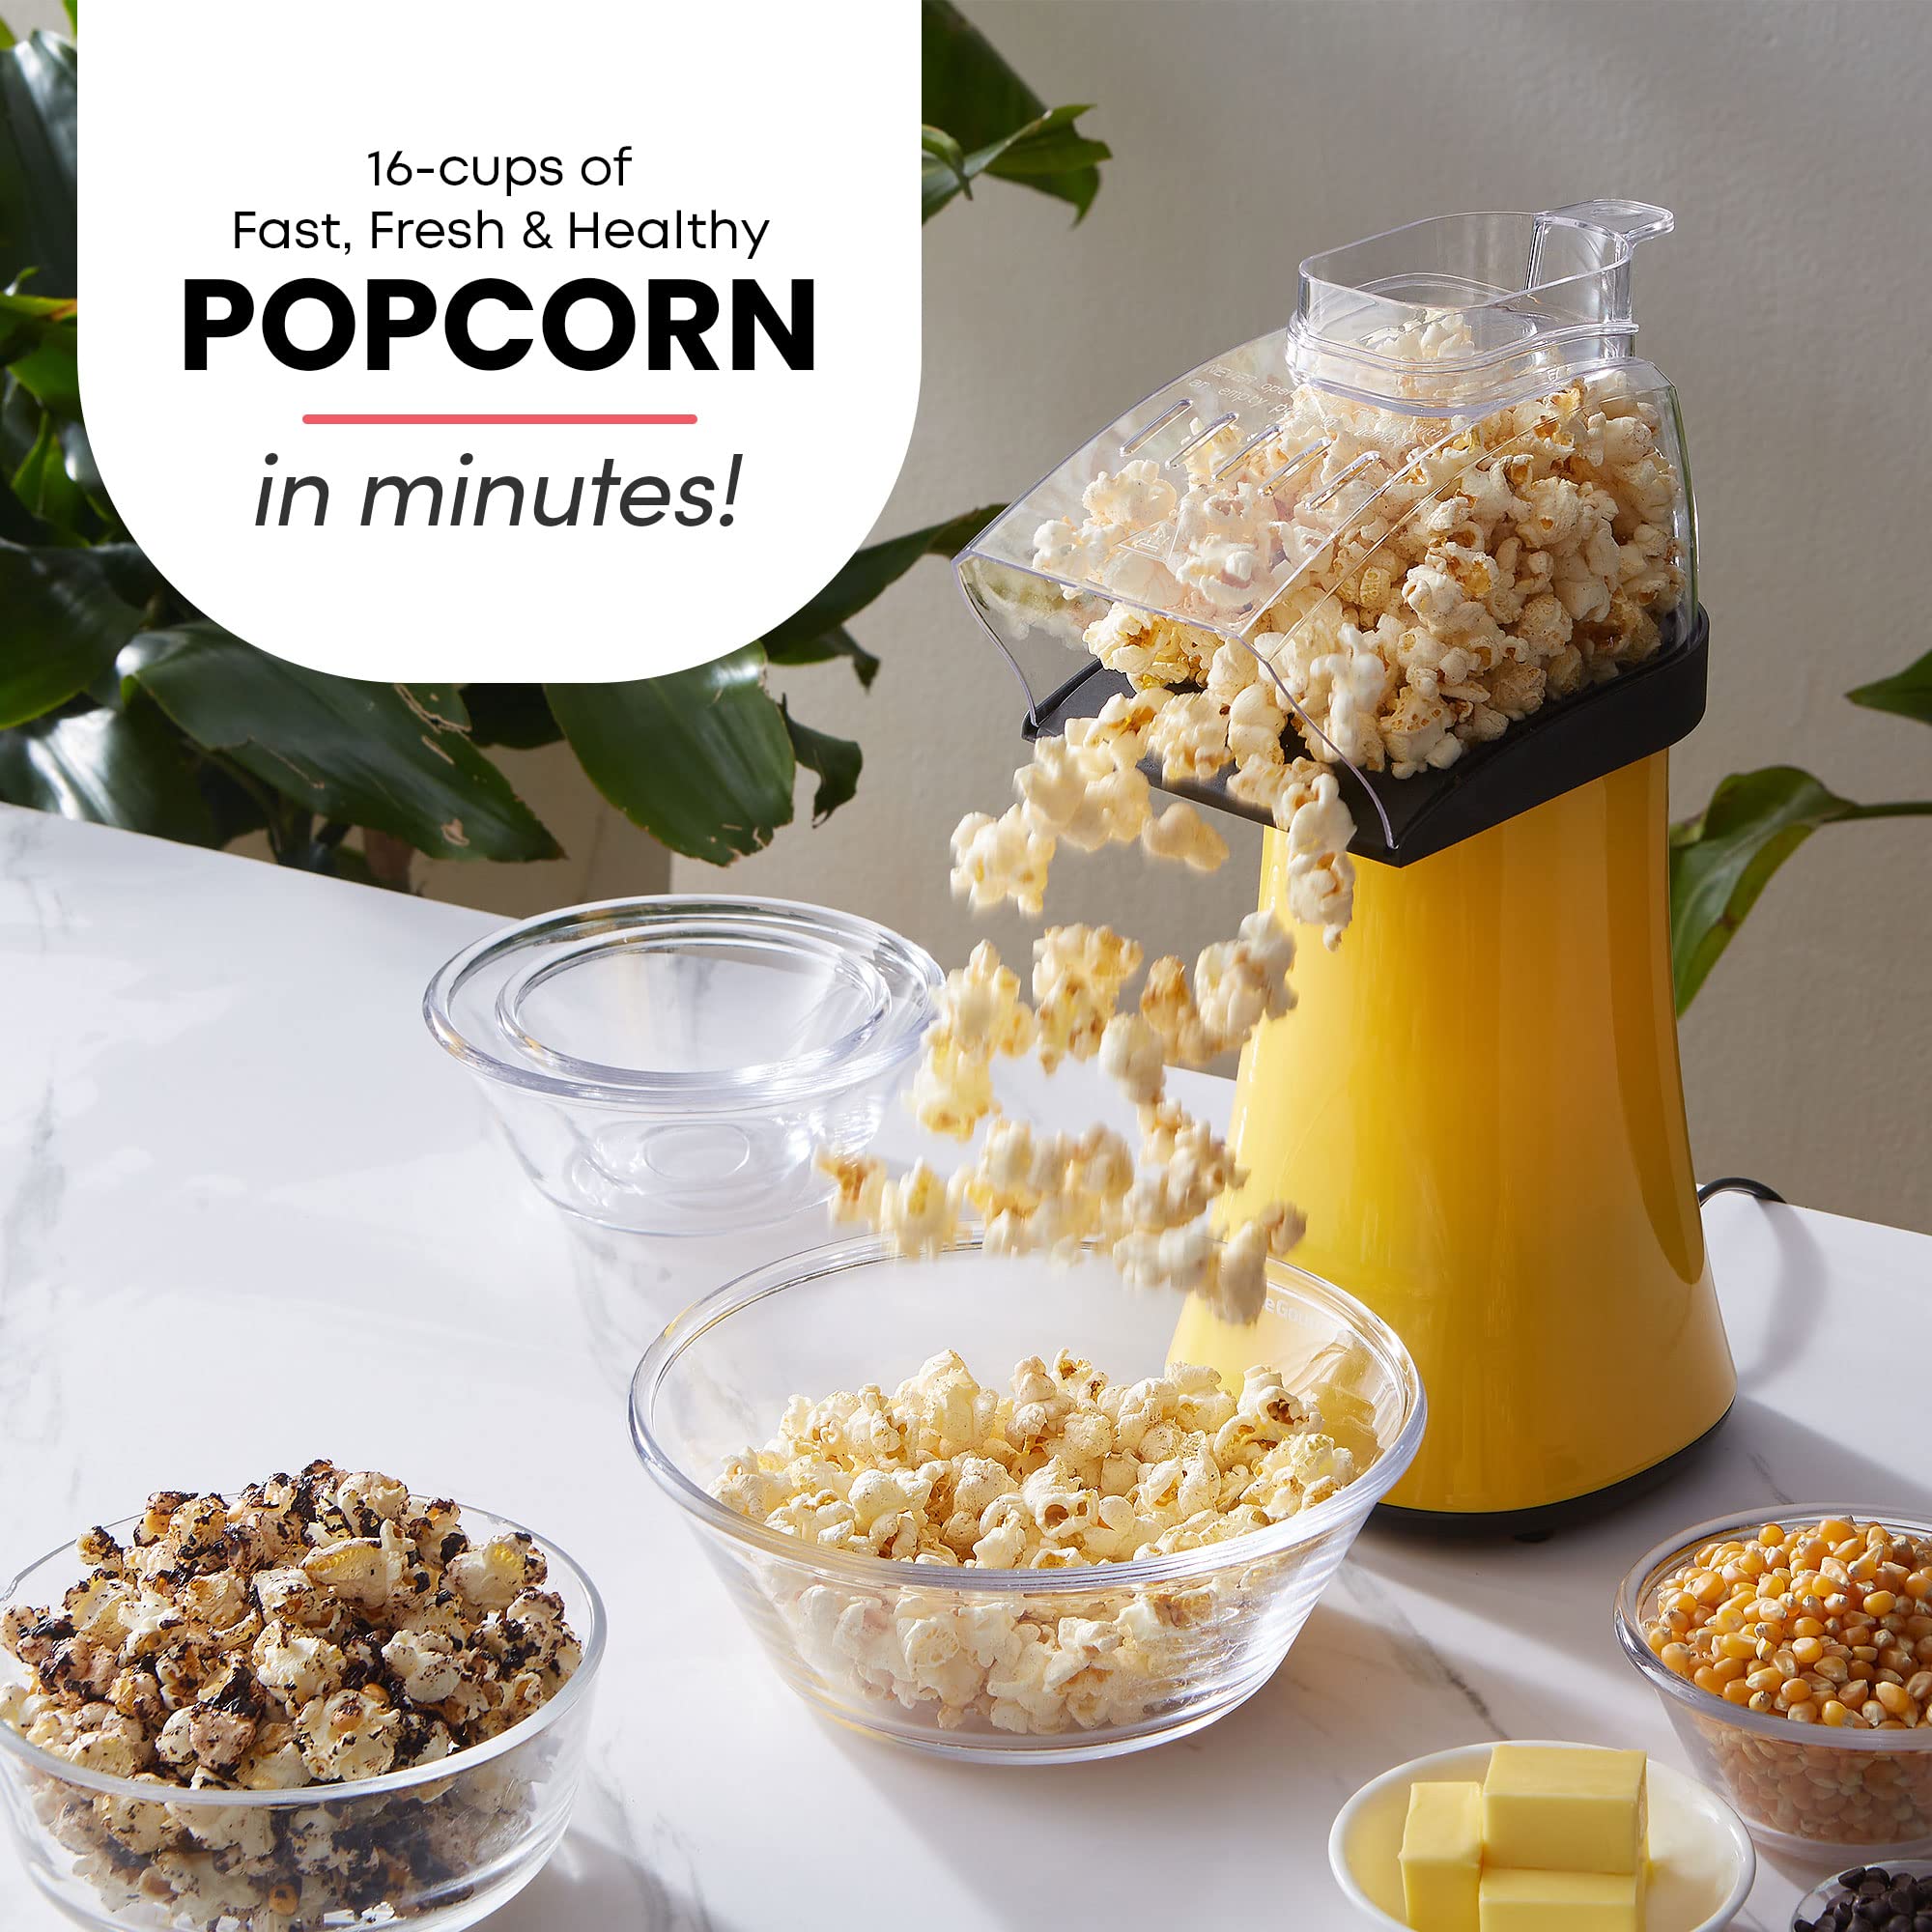 Elite Gourmet Fast Hot Air Popcorn Popper, 1300W Electric Popcorn Maker with Measuring Cup & Butter Melting Tray, Oil-Free, Great for Home Party Kids, Safety ETL Approved, 4-Quart, Yellow